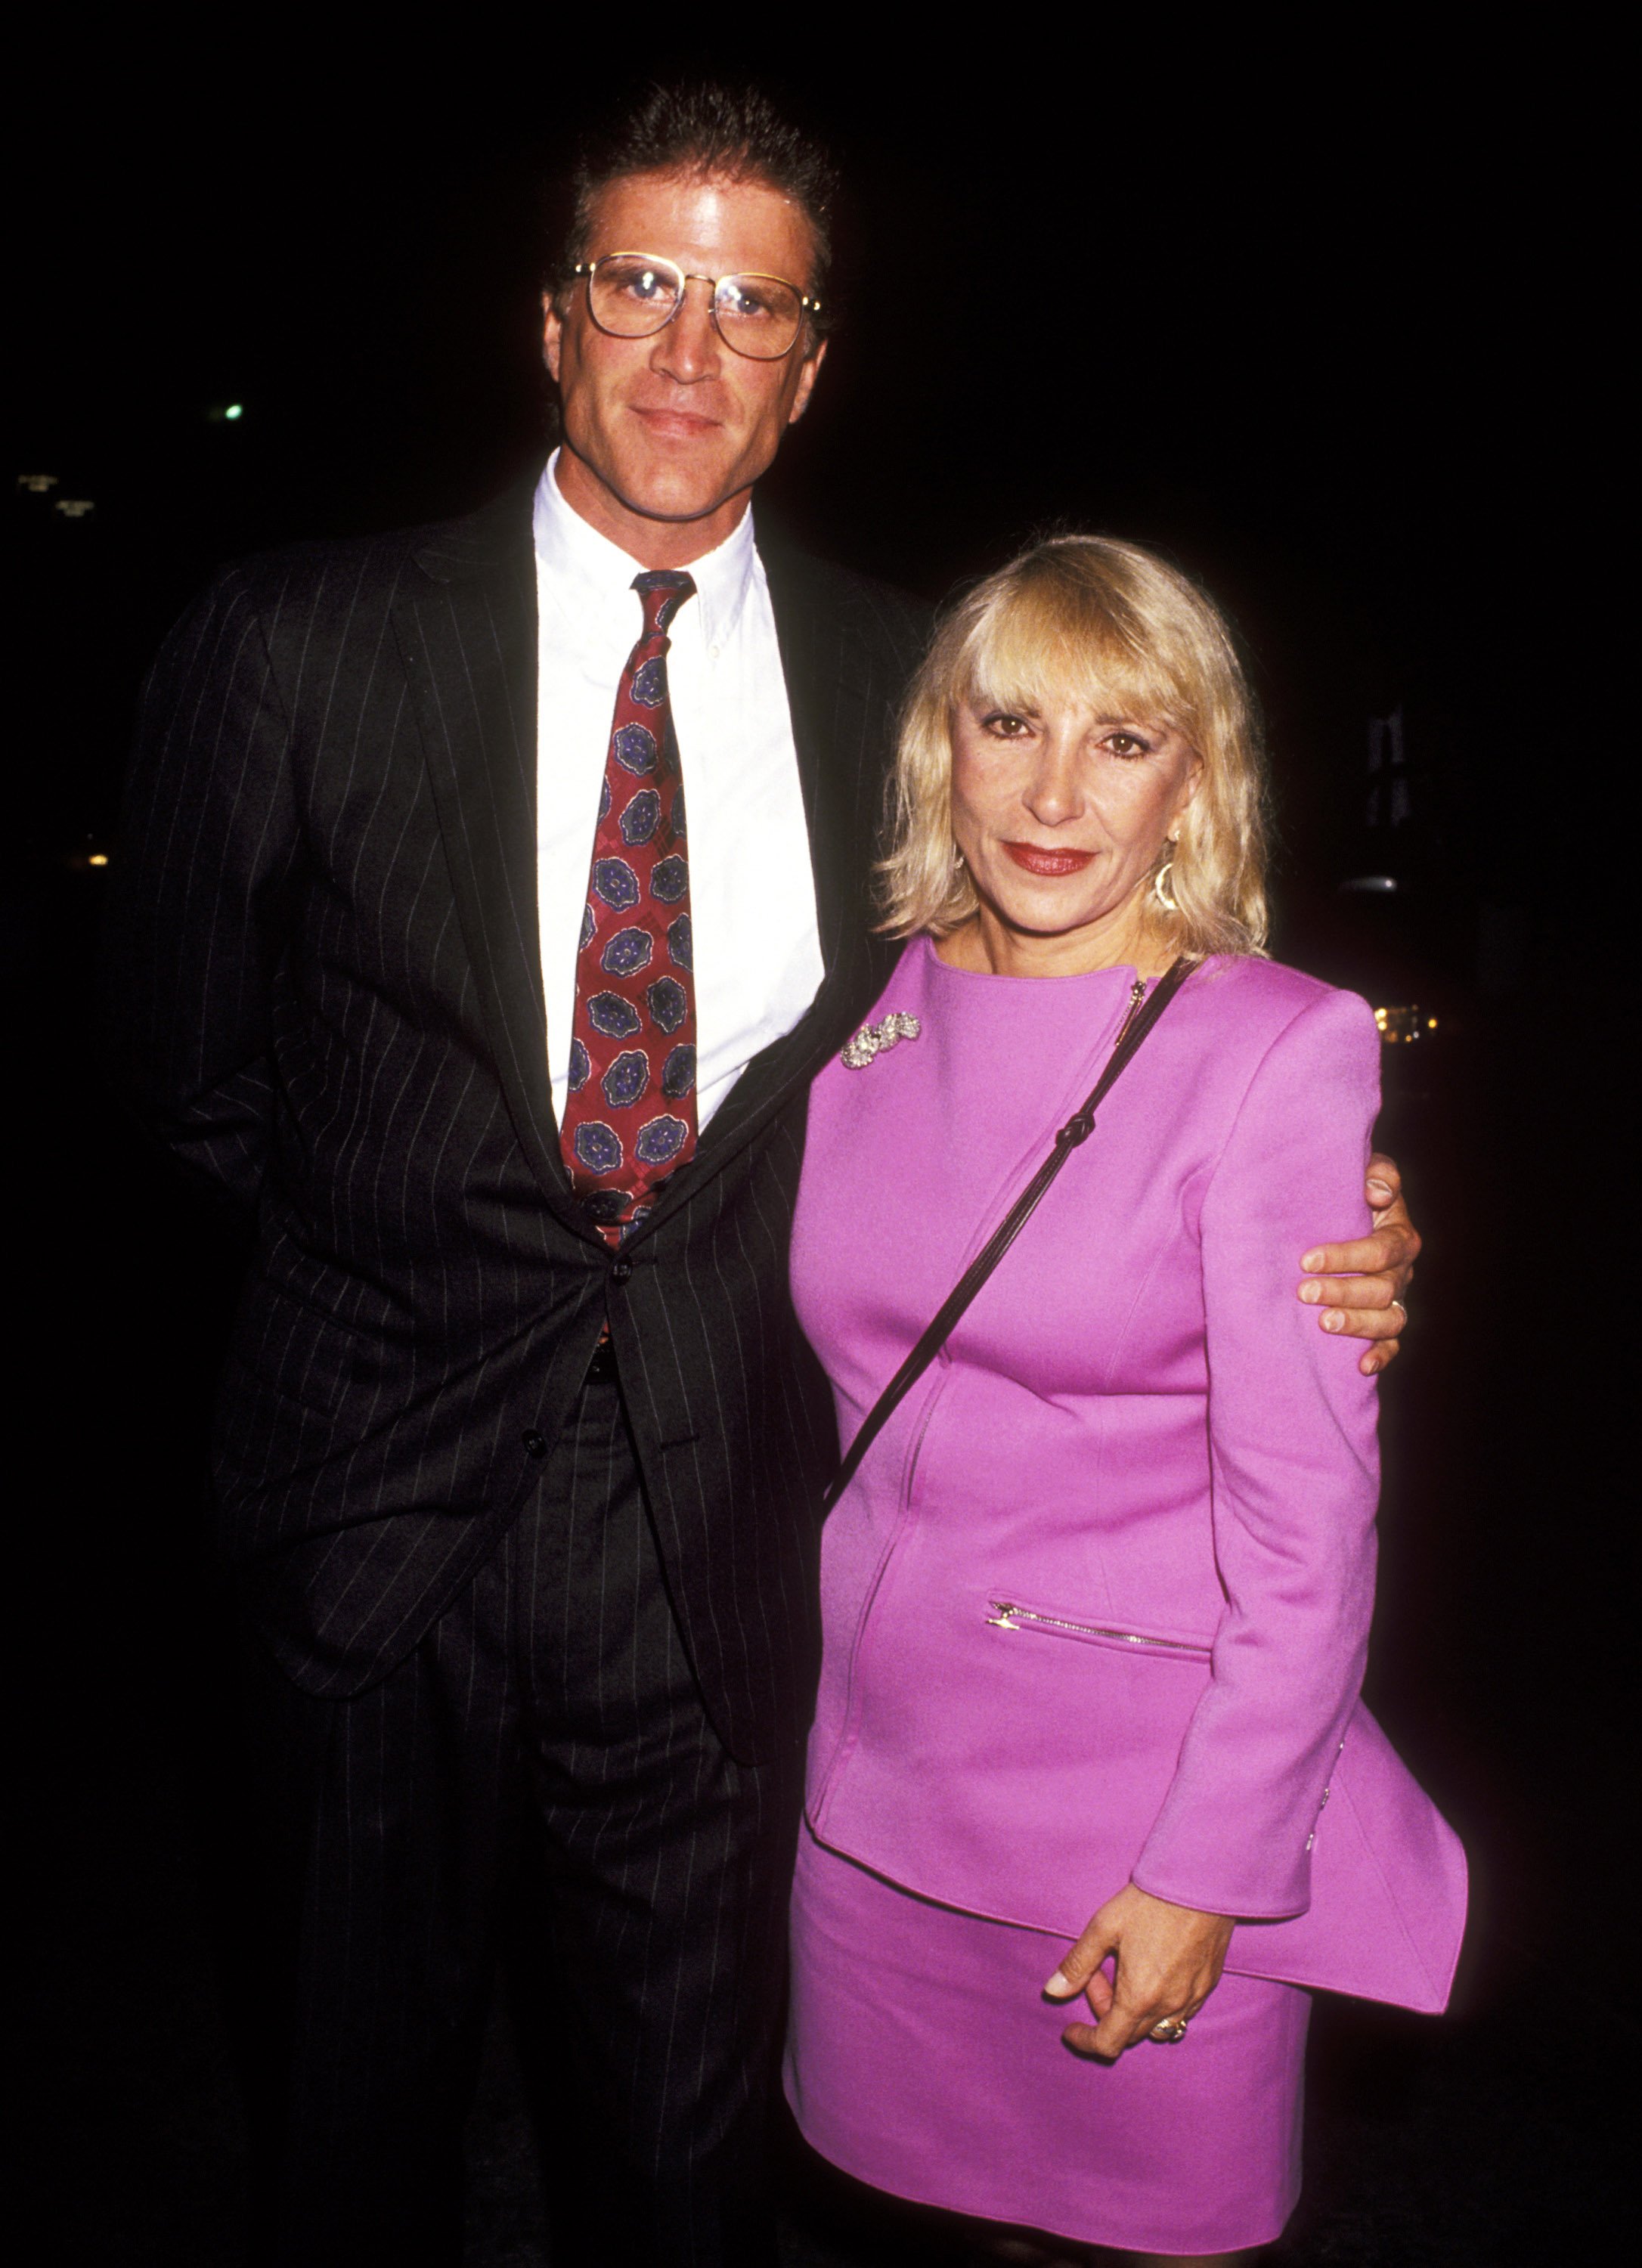 Ted Danson and Casey Coates during 1st Annual Environmental Awards at Sony Studios in Culver City, California, United States in September 1991 | Source: Getty Images